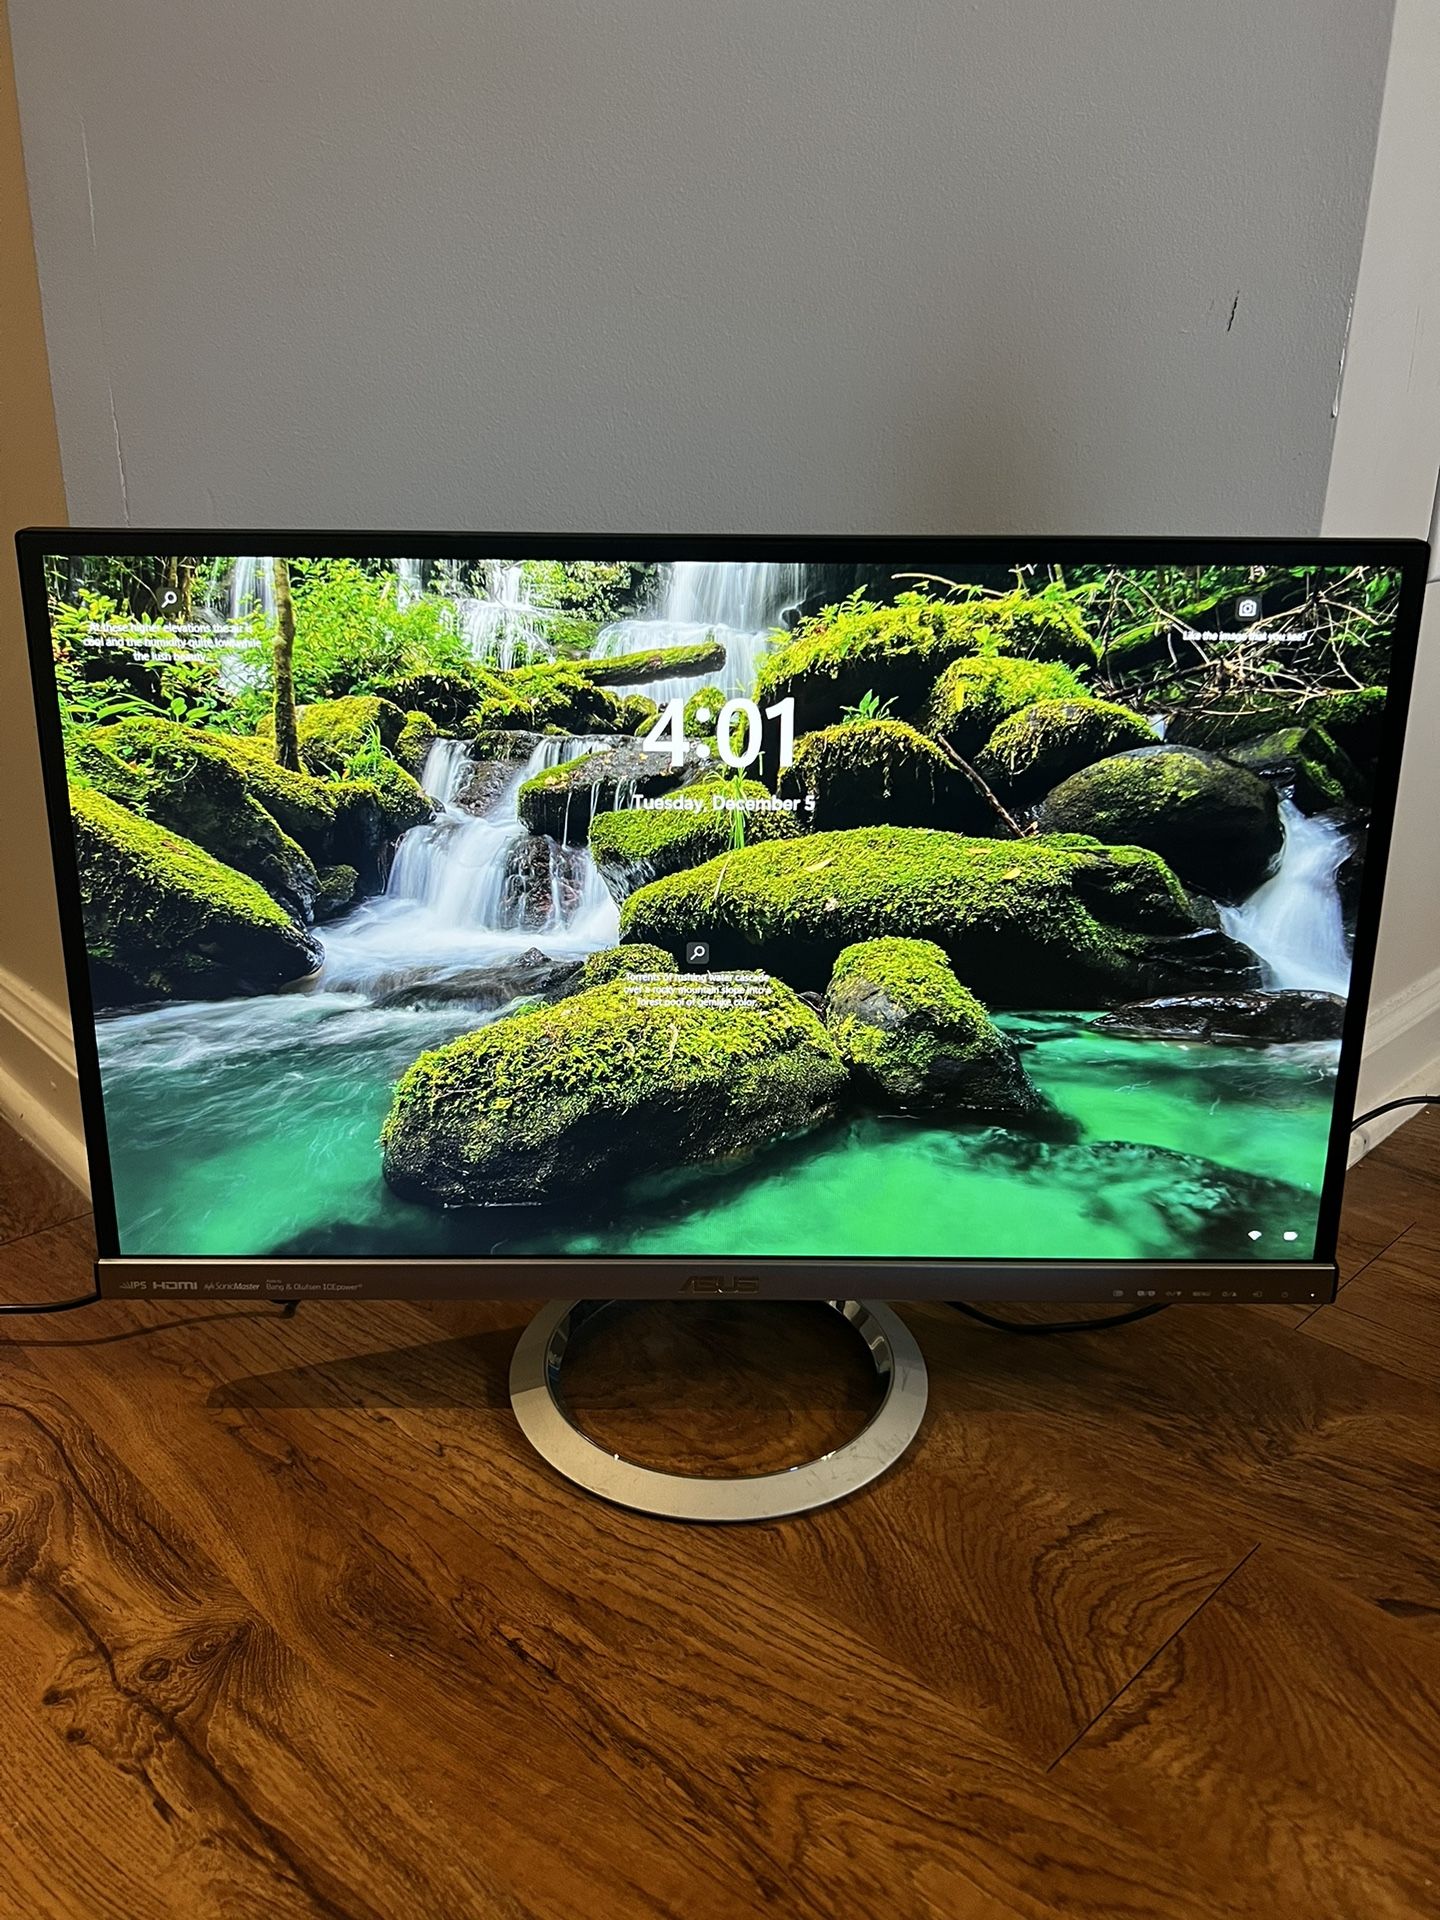 ASUS (MX279) 27 inch Monitor - NO HDMI INCLUDED